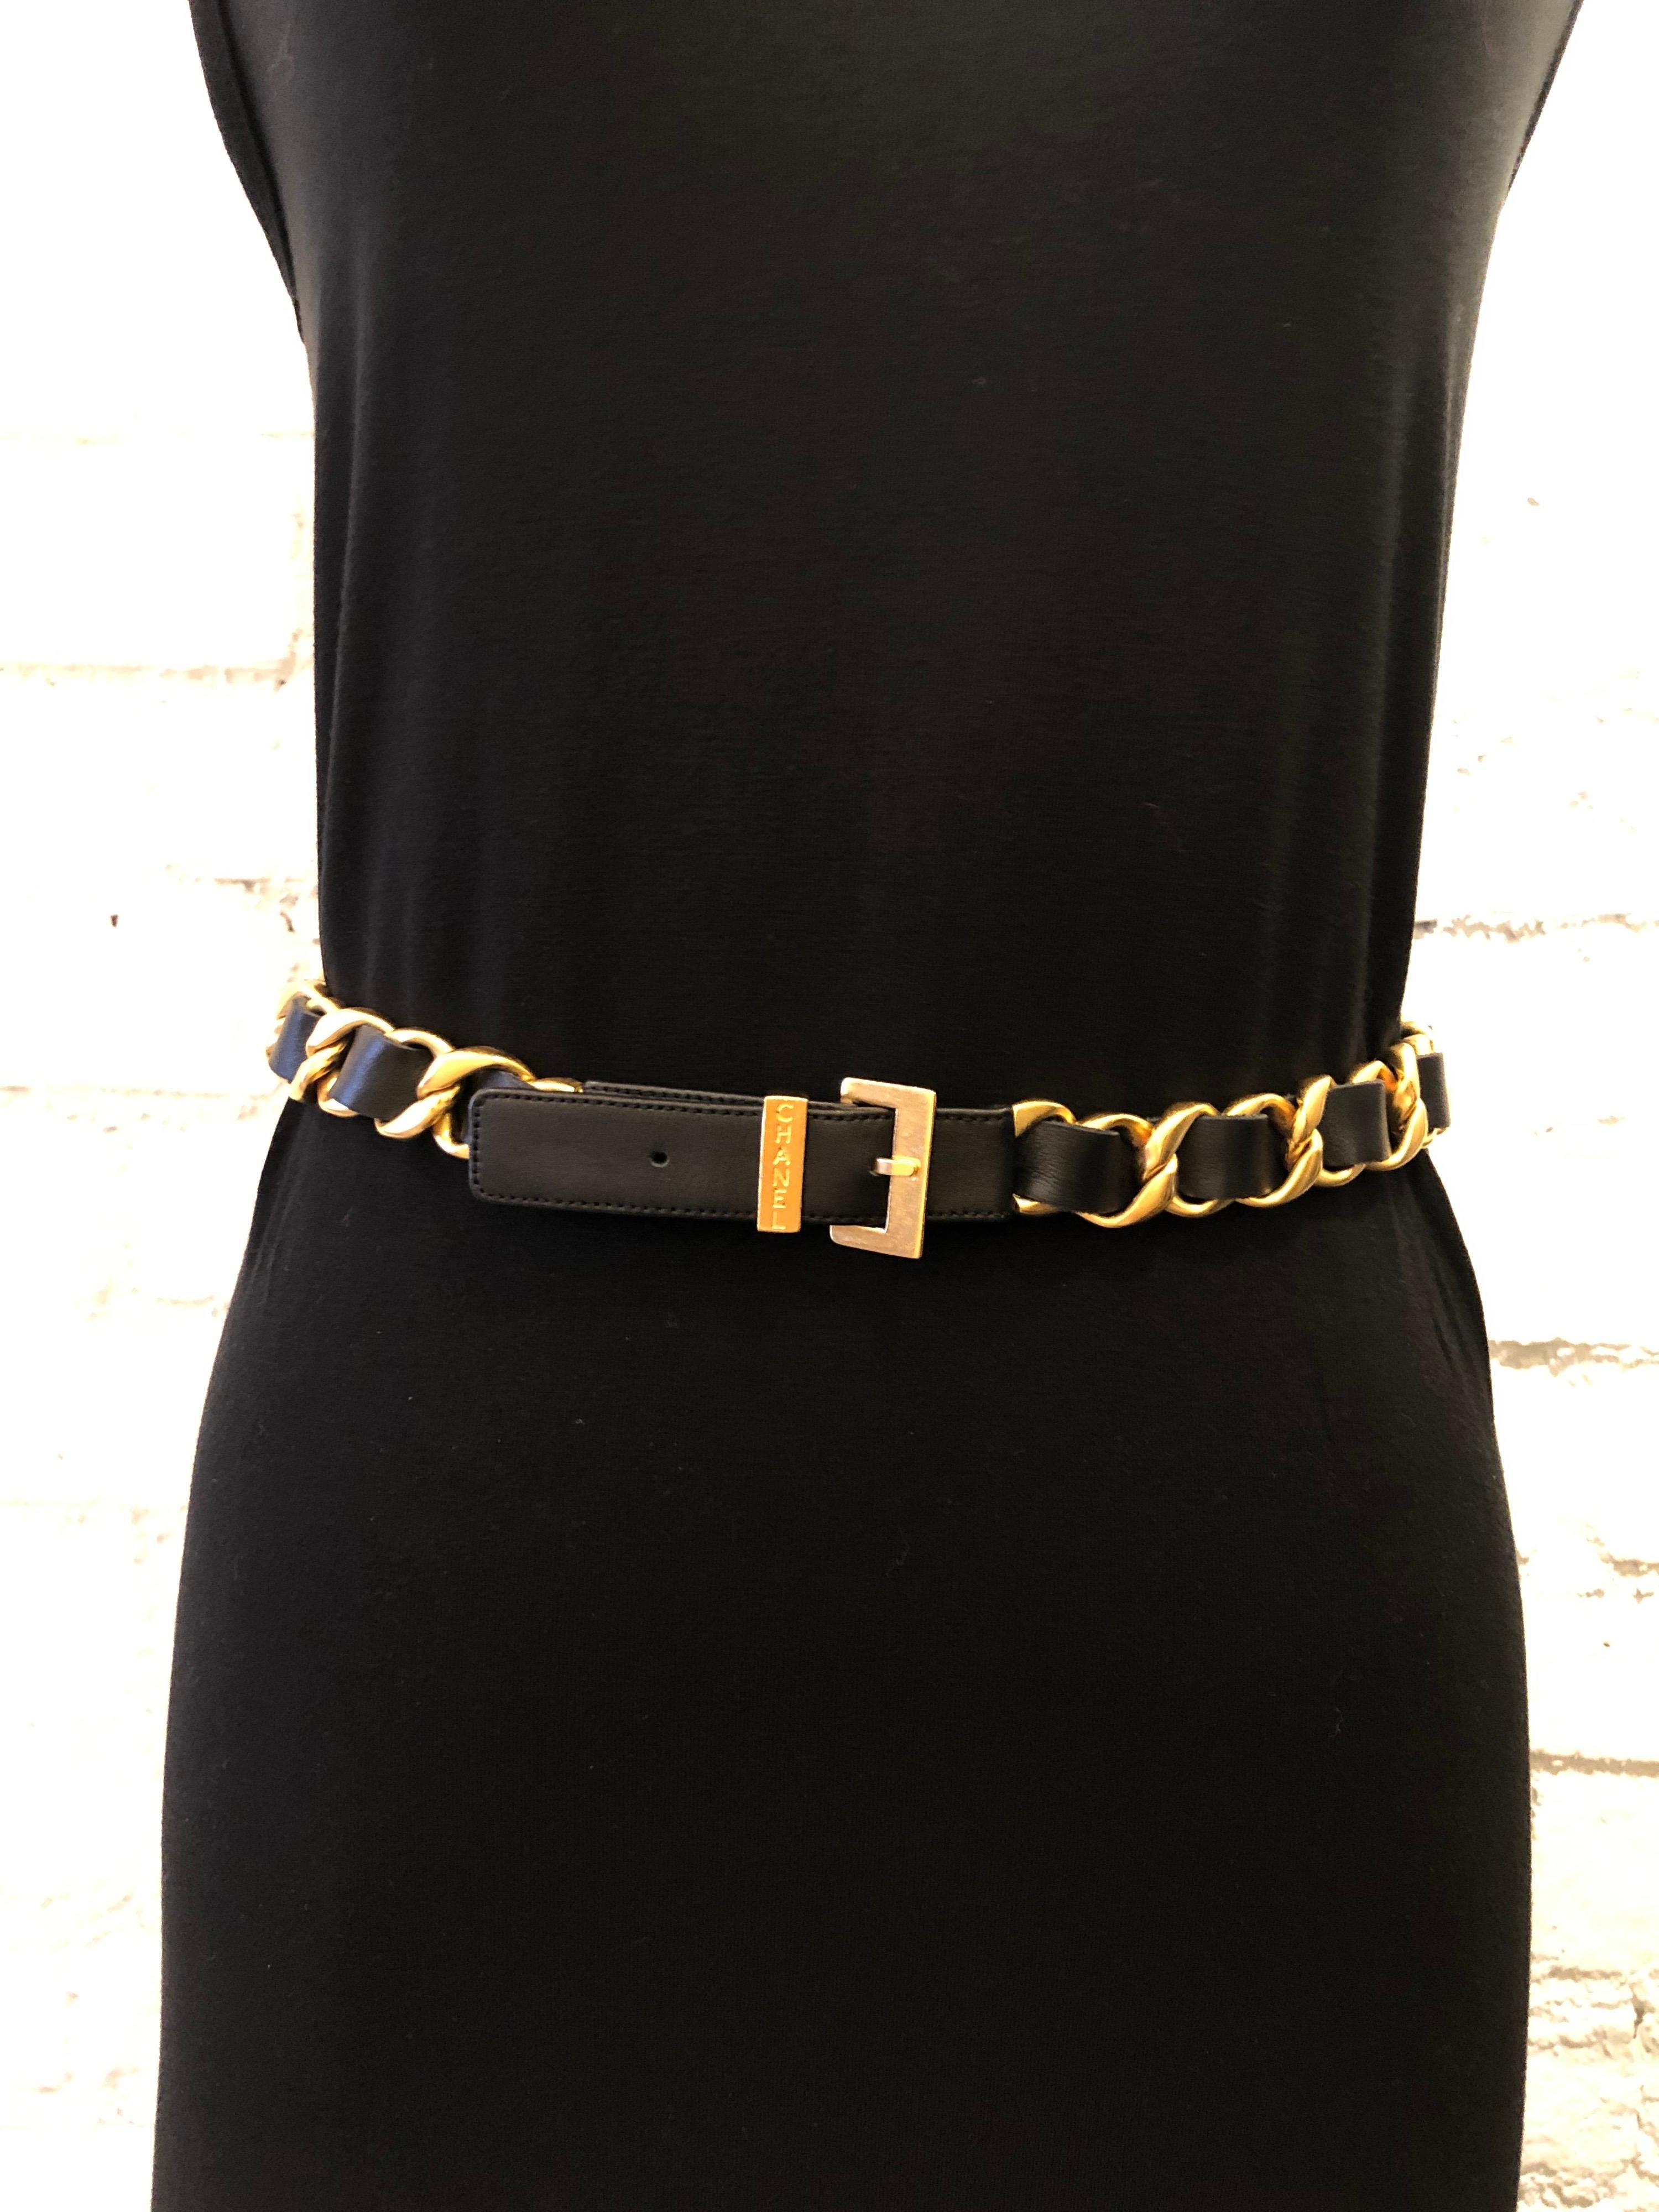 1990s Chanel gold toned chain belt interlaced with black leather. Stamped Chanel 96P made in France. Adjustable buckle fastening with three holes. Fits waist 76 - 81 cm (30 - 32 inches) Chain width 2.1 cm. Comes with box. 

Condition - Minor signs